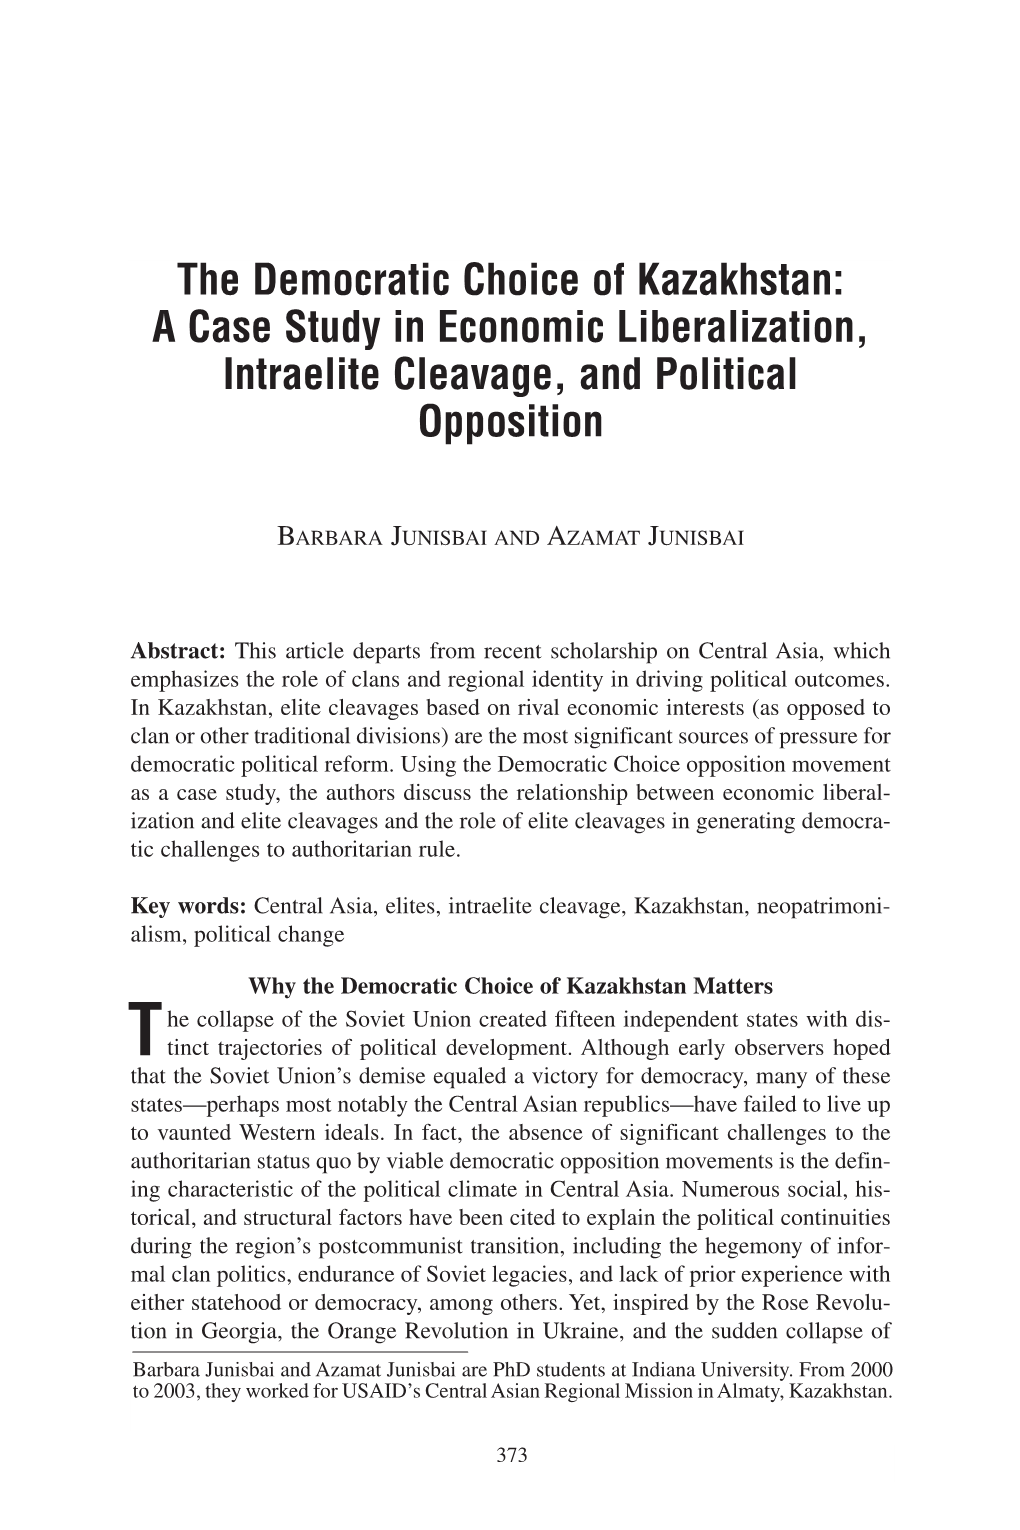 The Democratic Choice of Kazakhstan: a Case Study in Economic Liberalization, Intraelite Cleavage, and Political Opposition